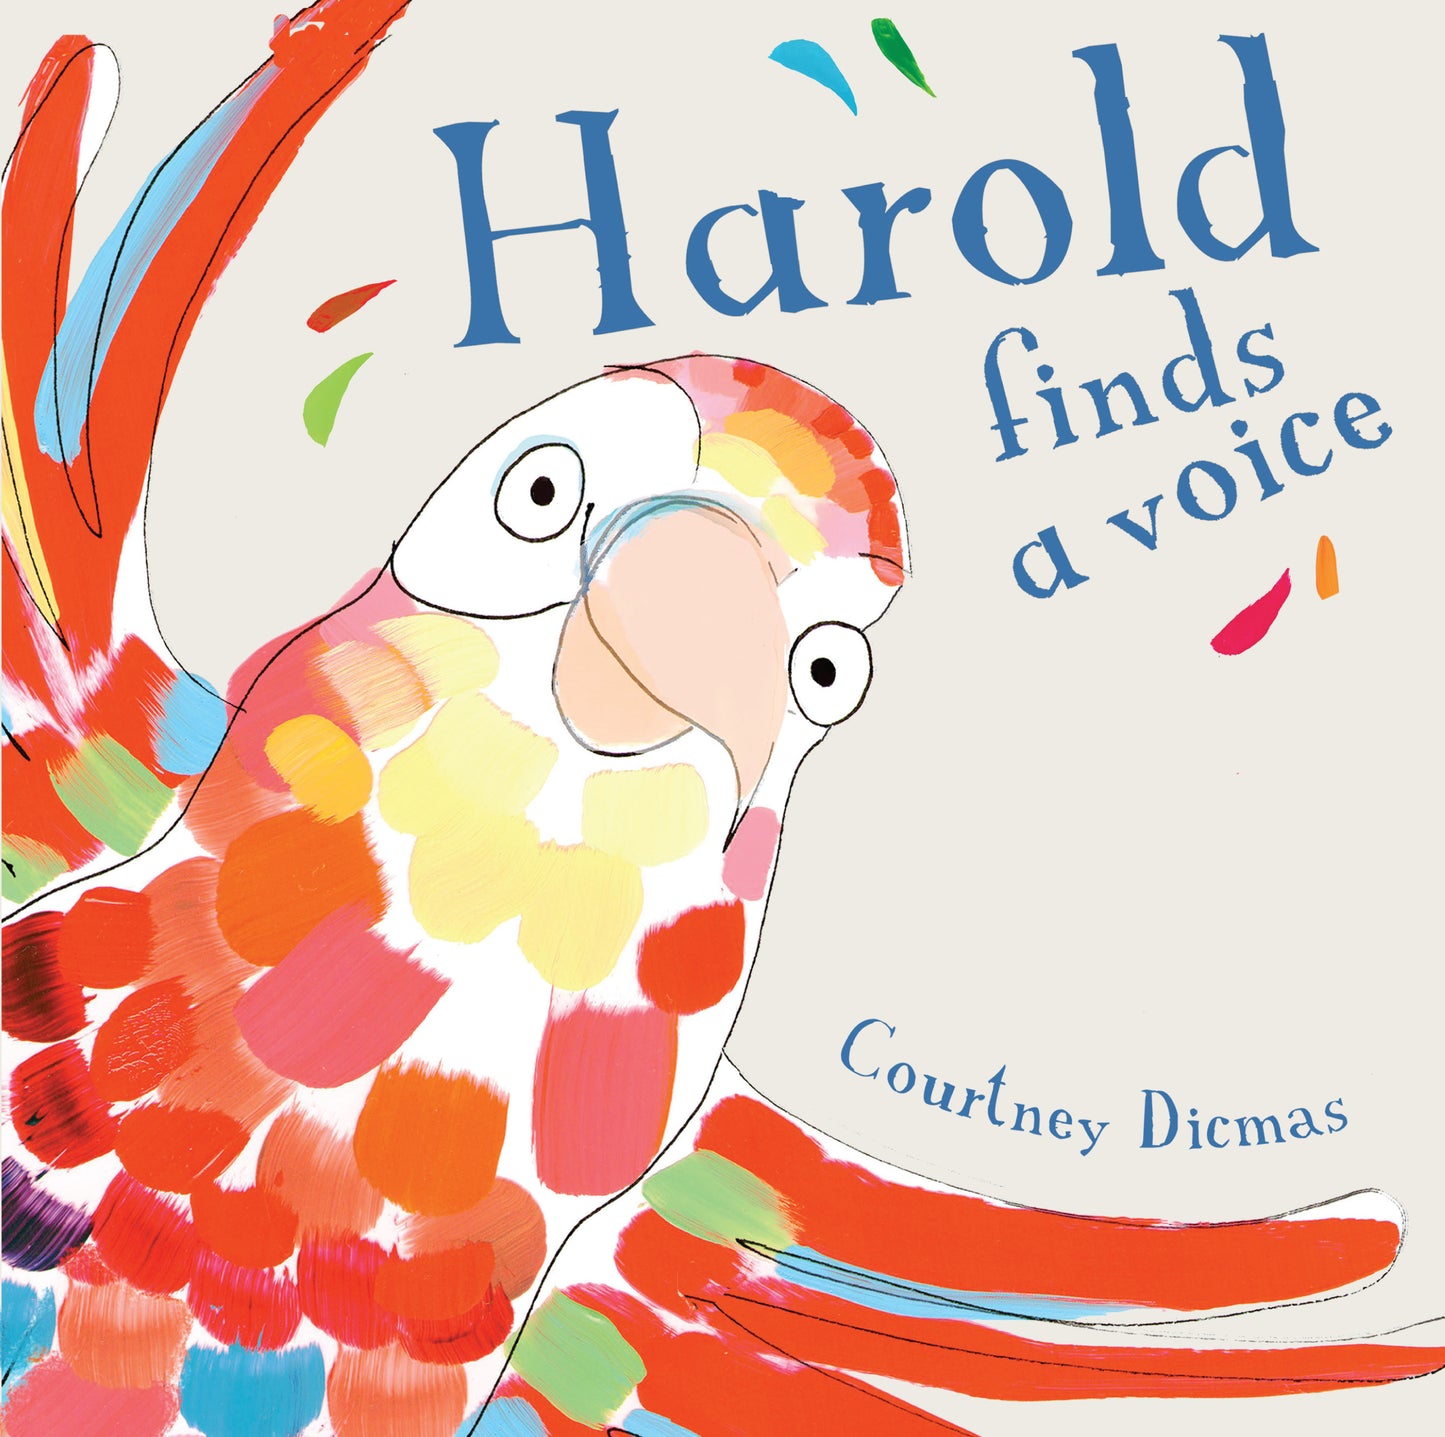 Harold Finds a Voice (Hardcover Edition)